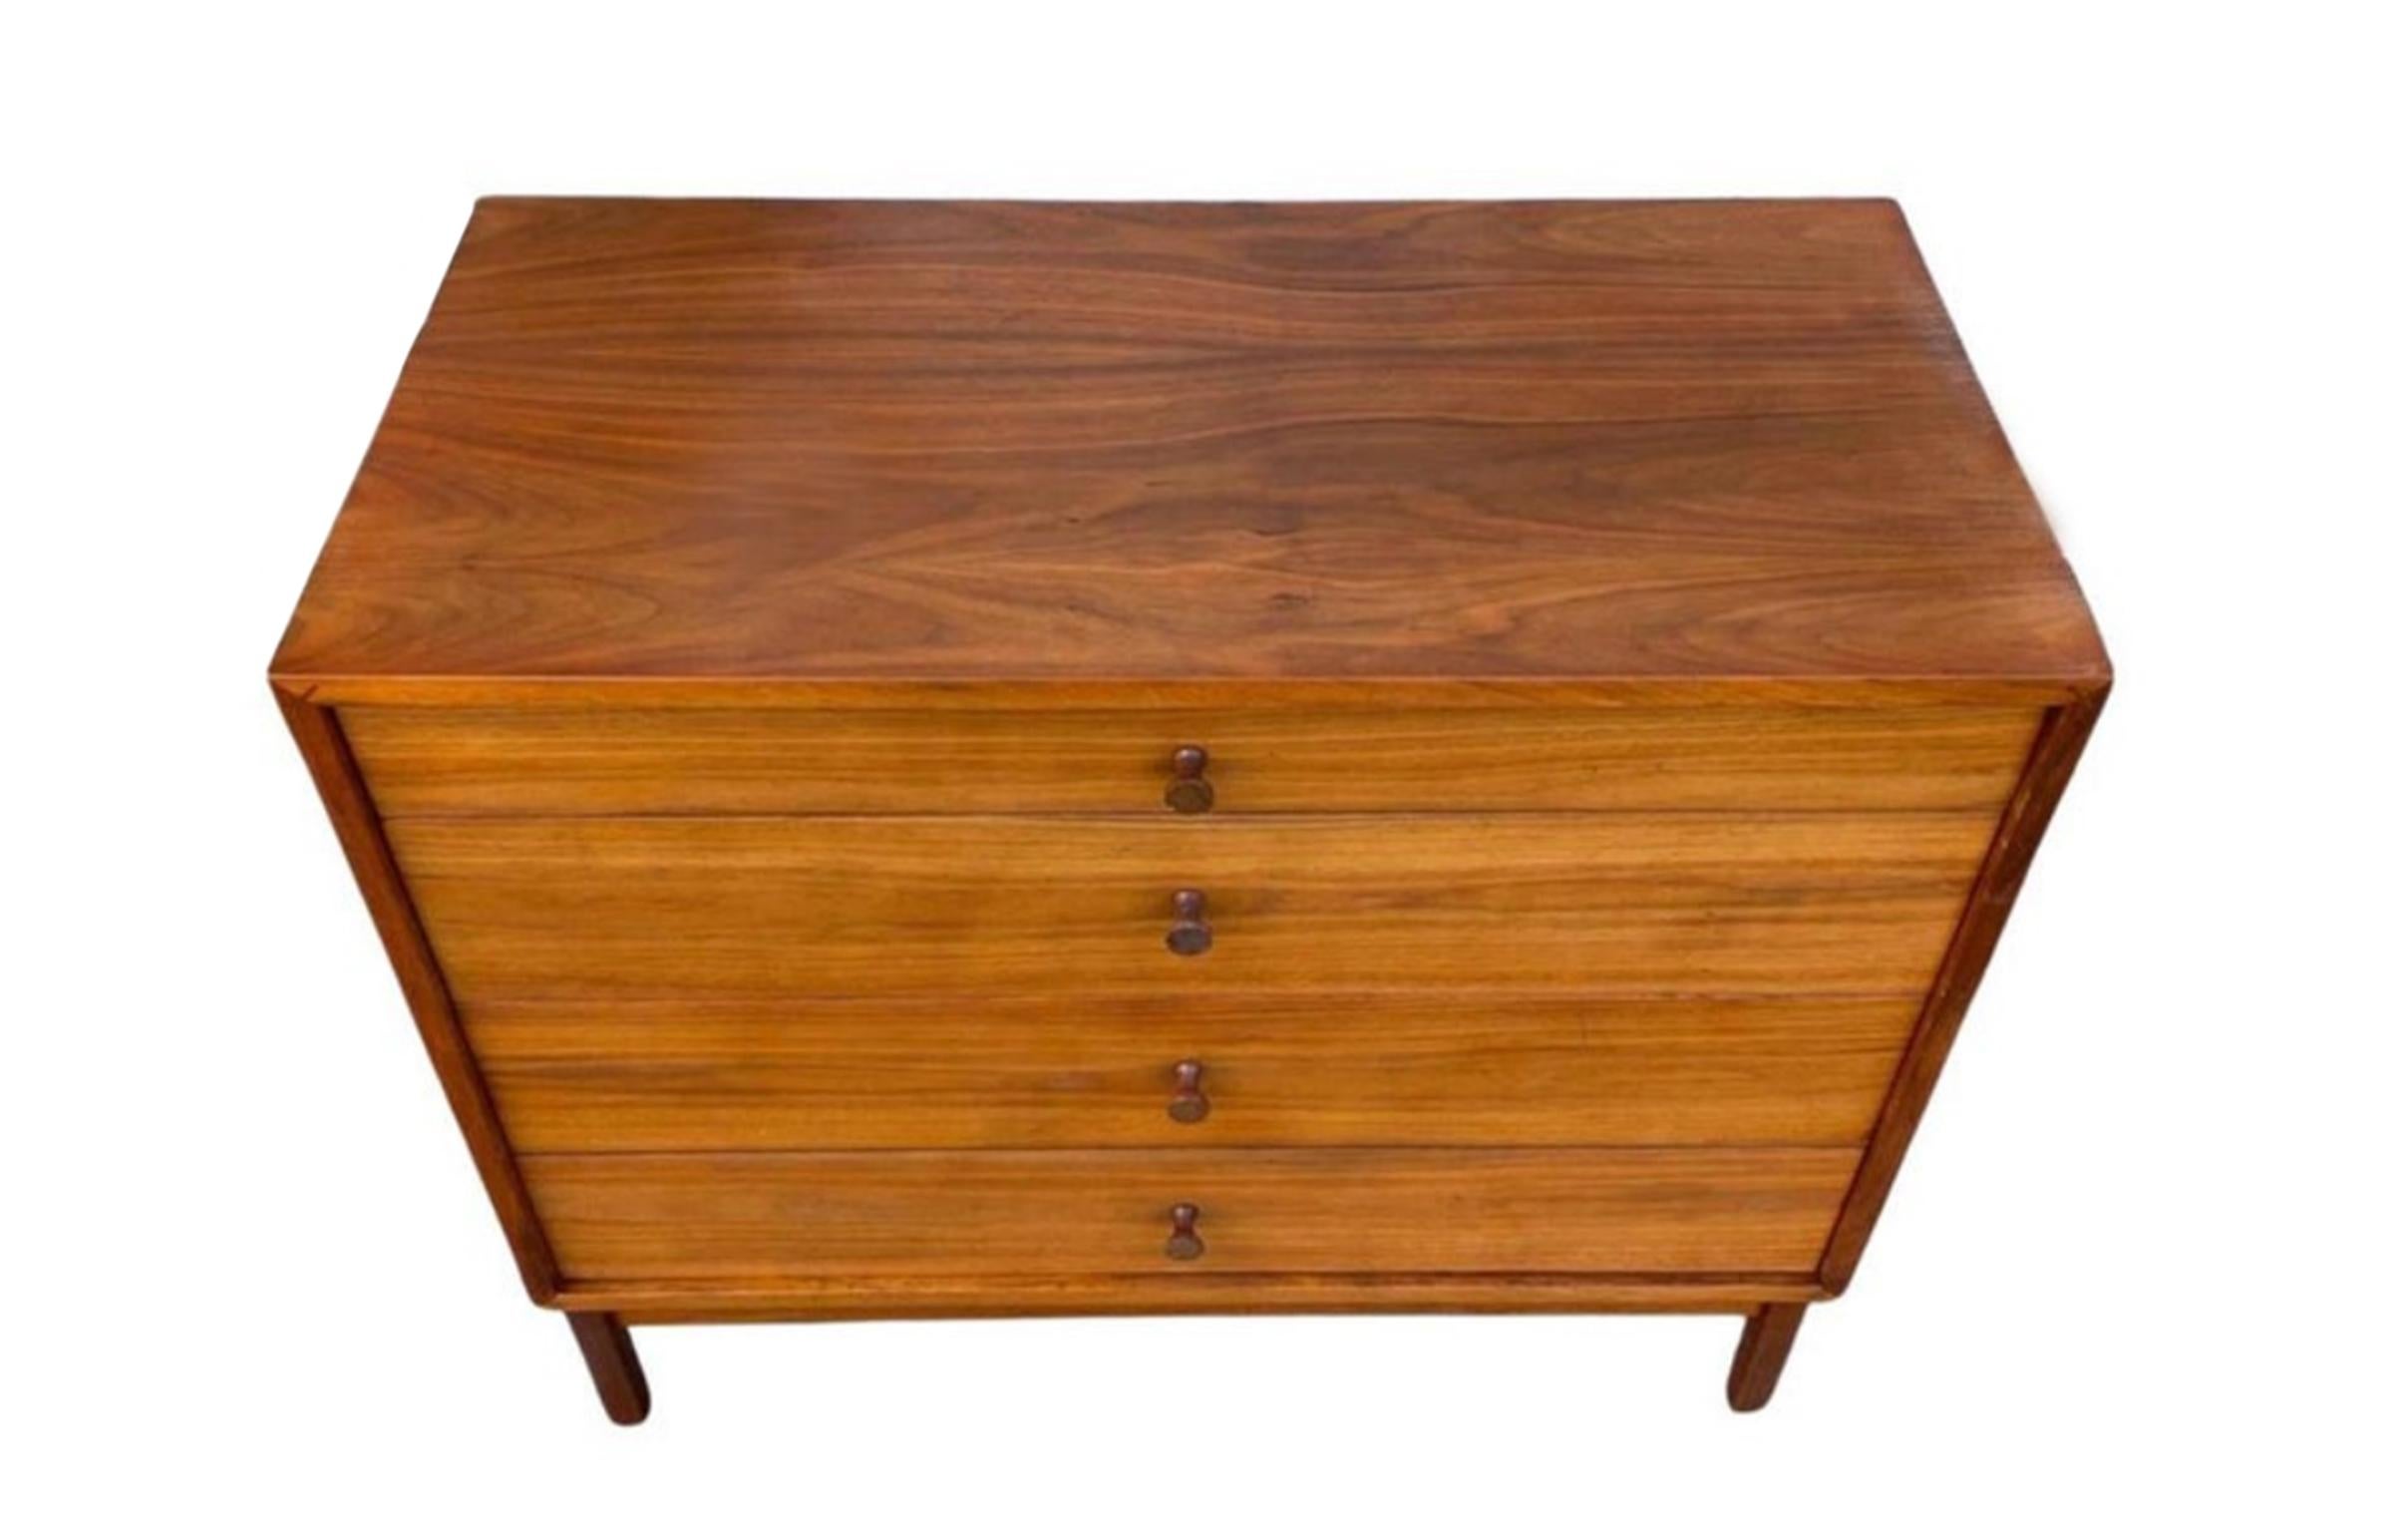 Midcentury American Studio craft Richard Artschwager walnut 4 drawer dresser. Good vintage condition with solid walnut round tapered knobs. clean inside and out. circa 1960 made in NYC. Located in Brooklyn NYC.